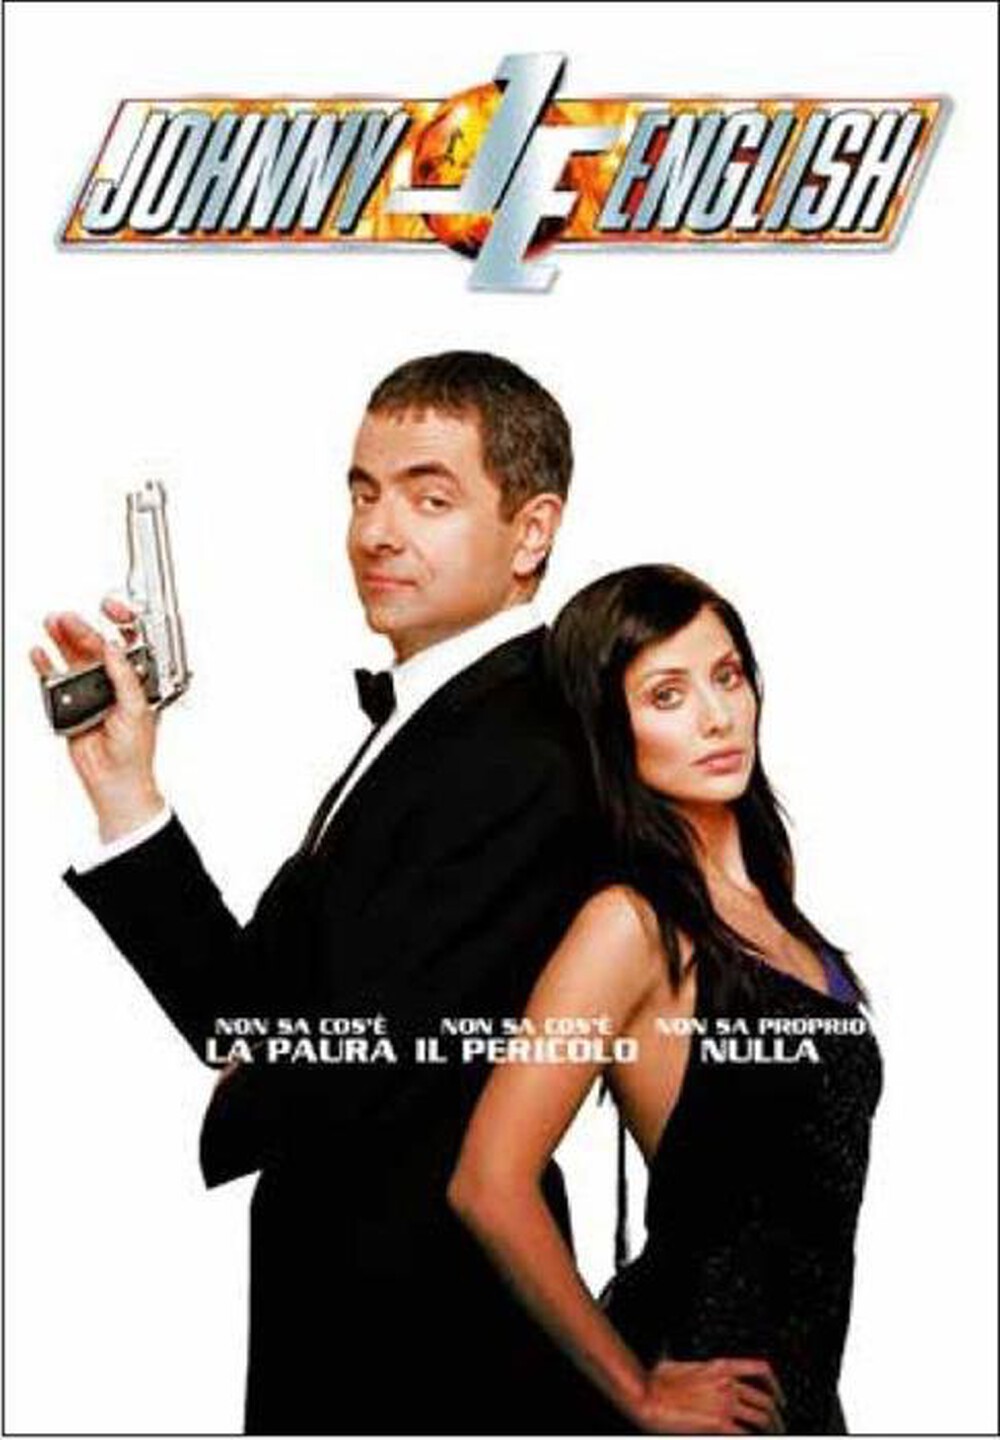 "UNIVERSAL PICTURES - Johnny English"